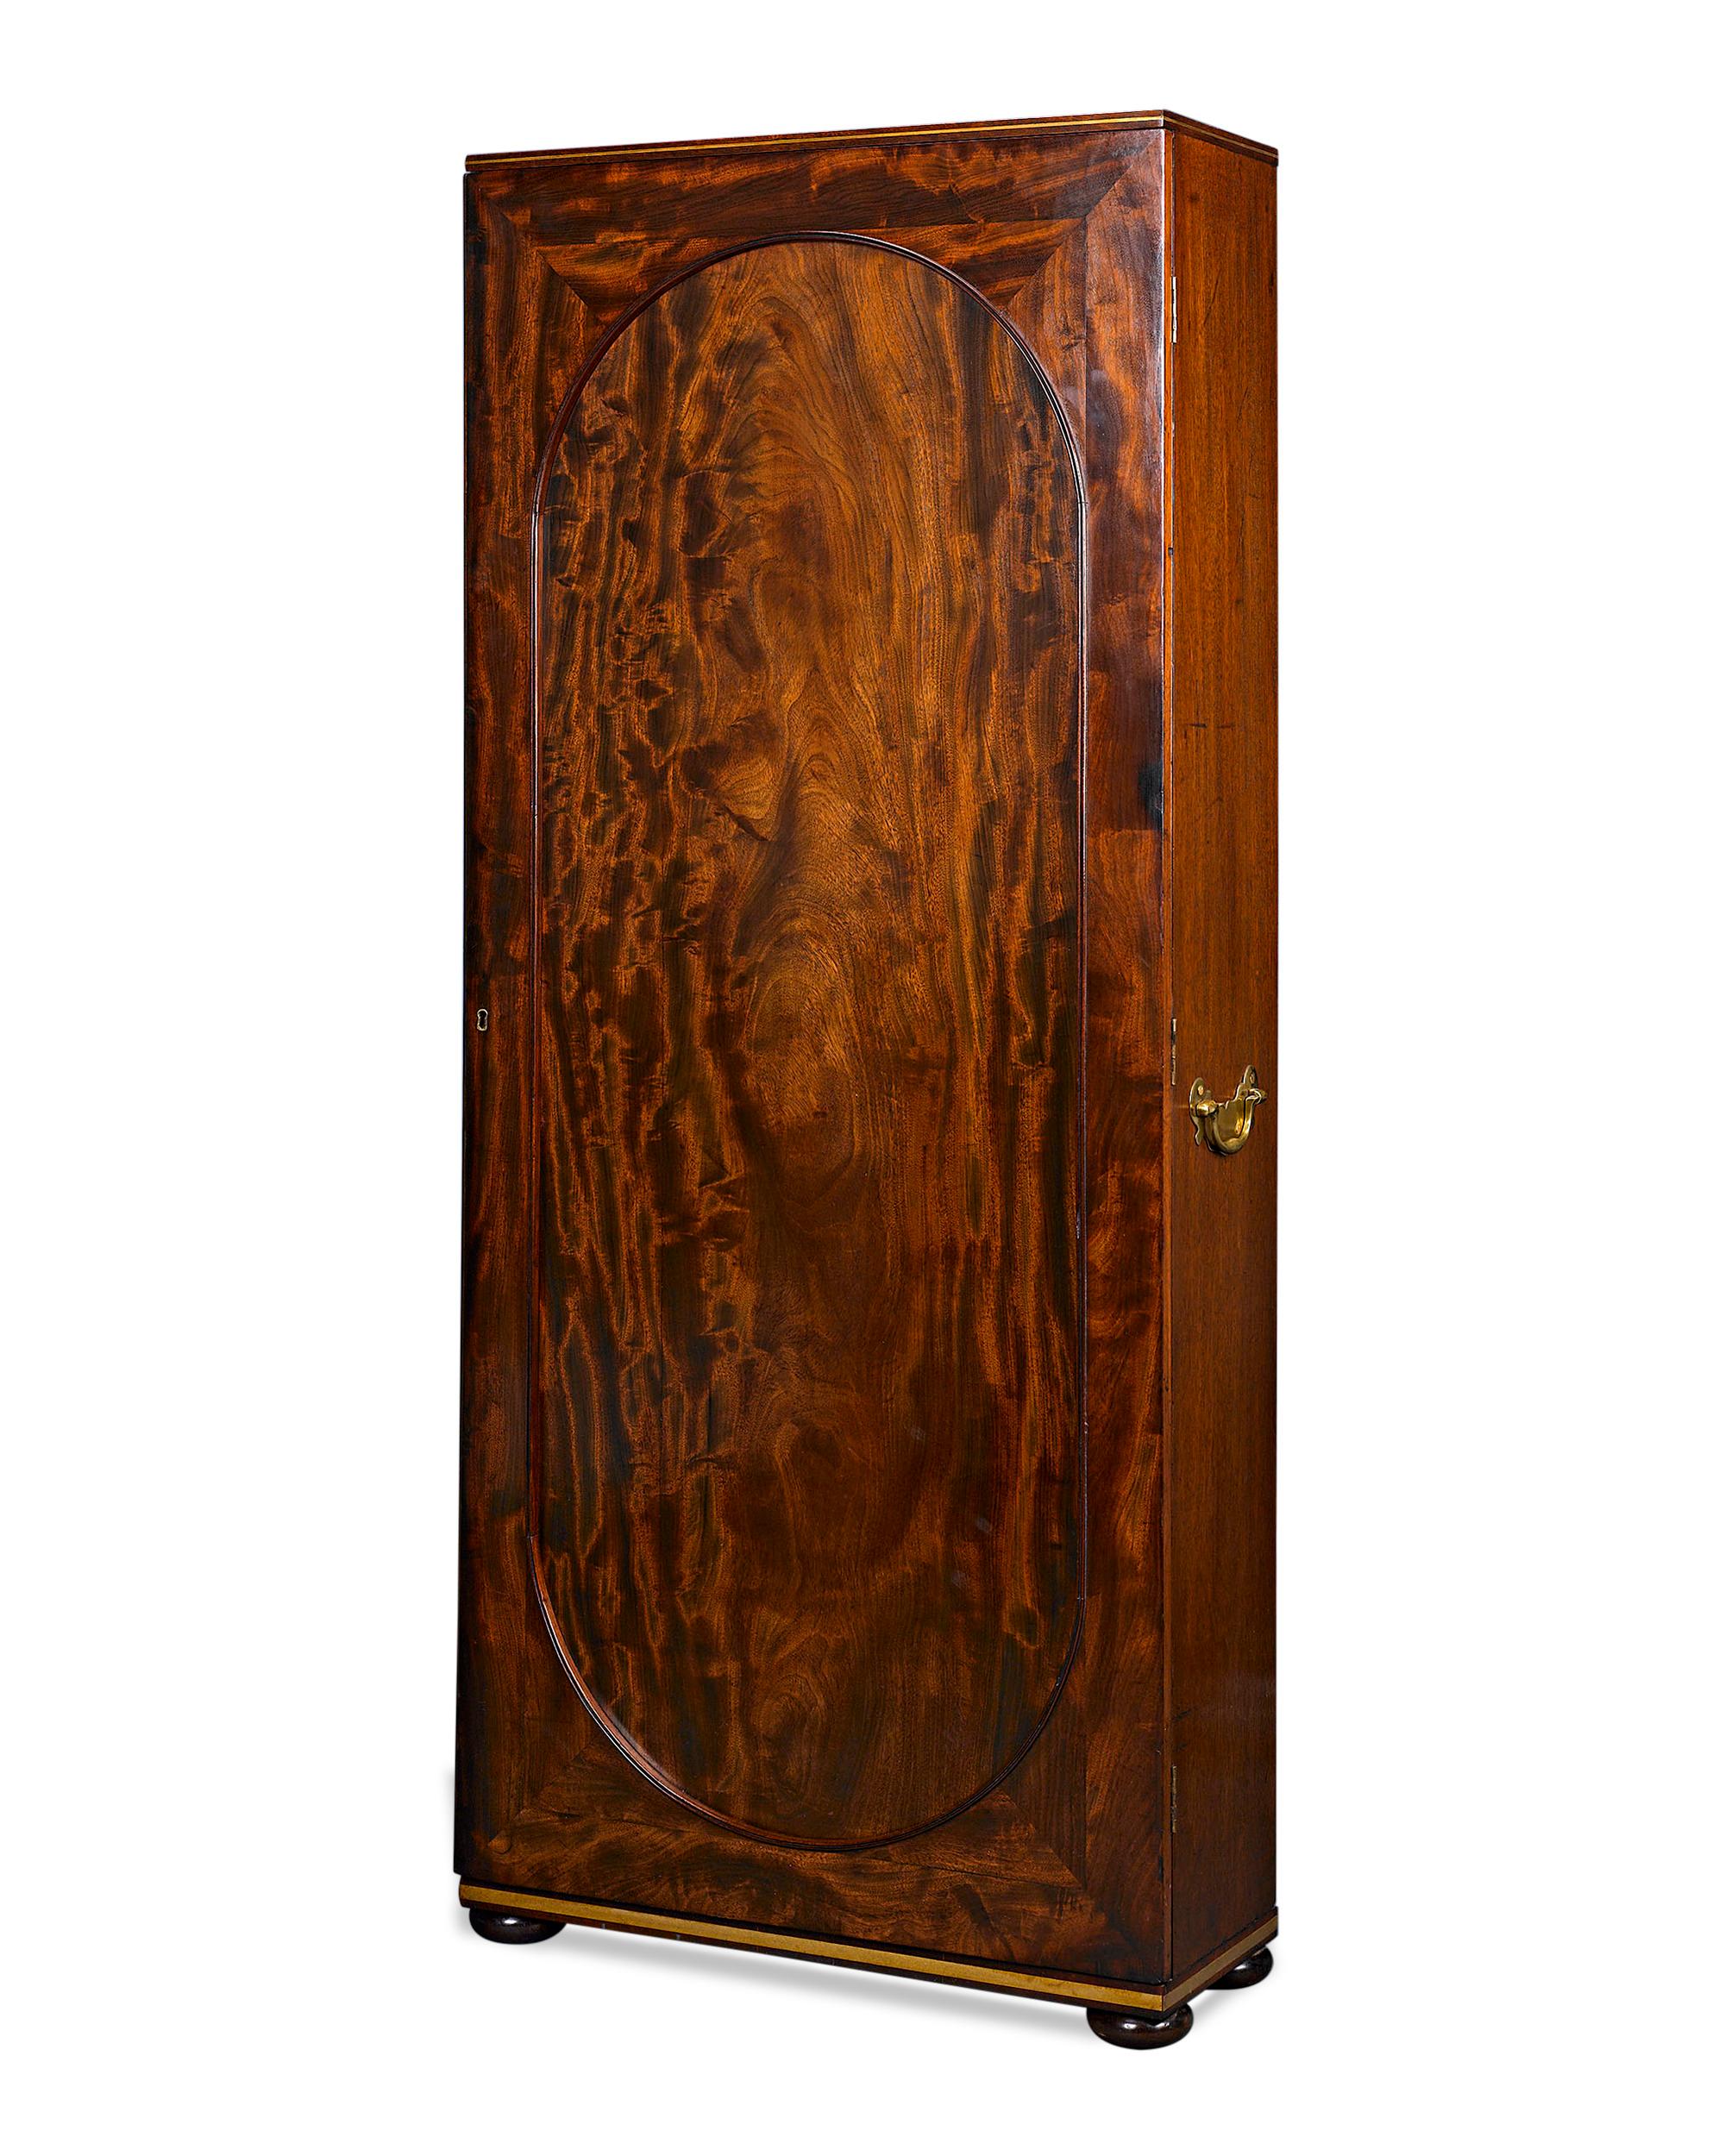 Mahogany Upright Cane Cabinet In Excellent Condition For Sale In New Orleans, LA